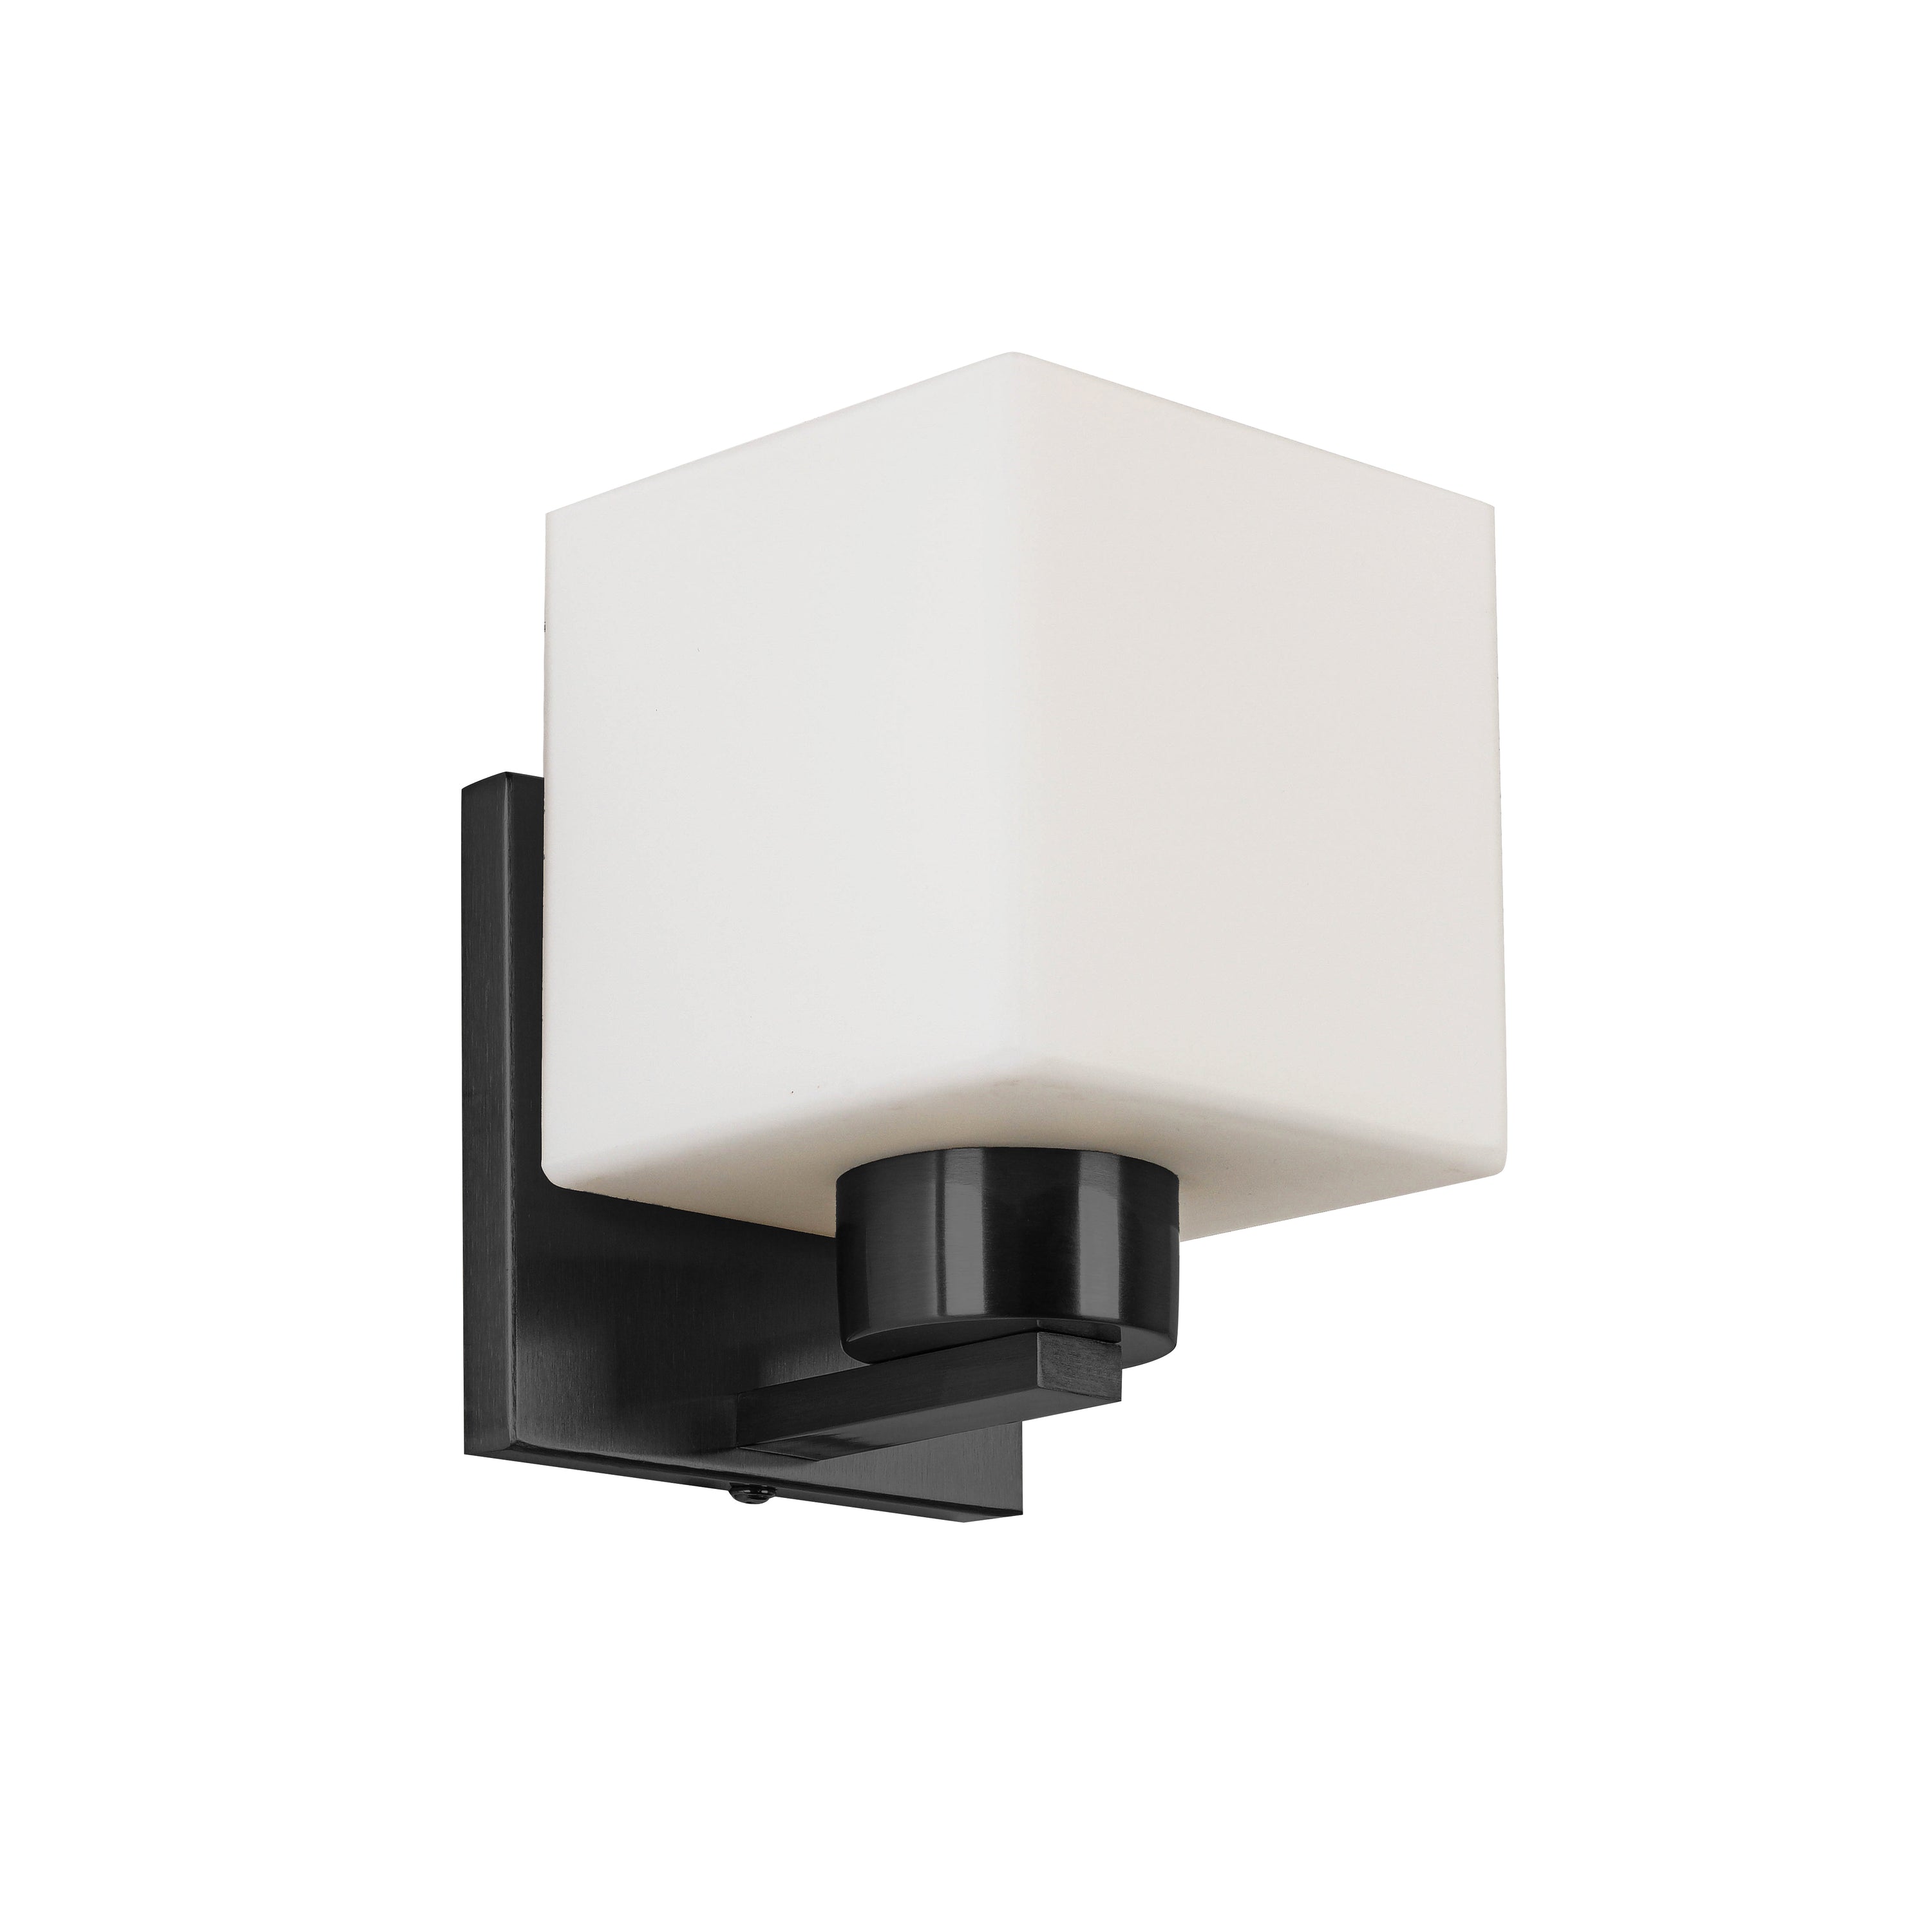 Dainolite VED-51W-MB 1 Light Wall Sconce Matte Black with White Opal Glass